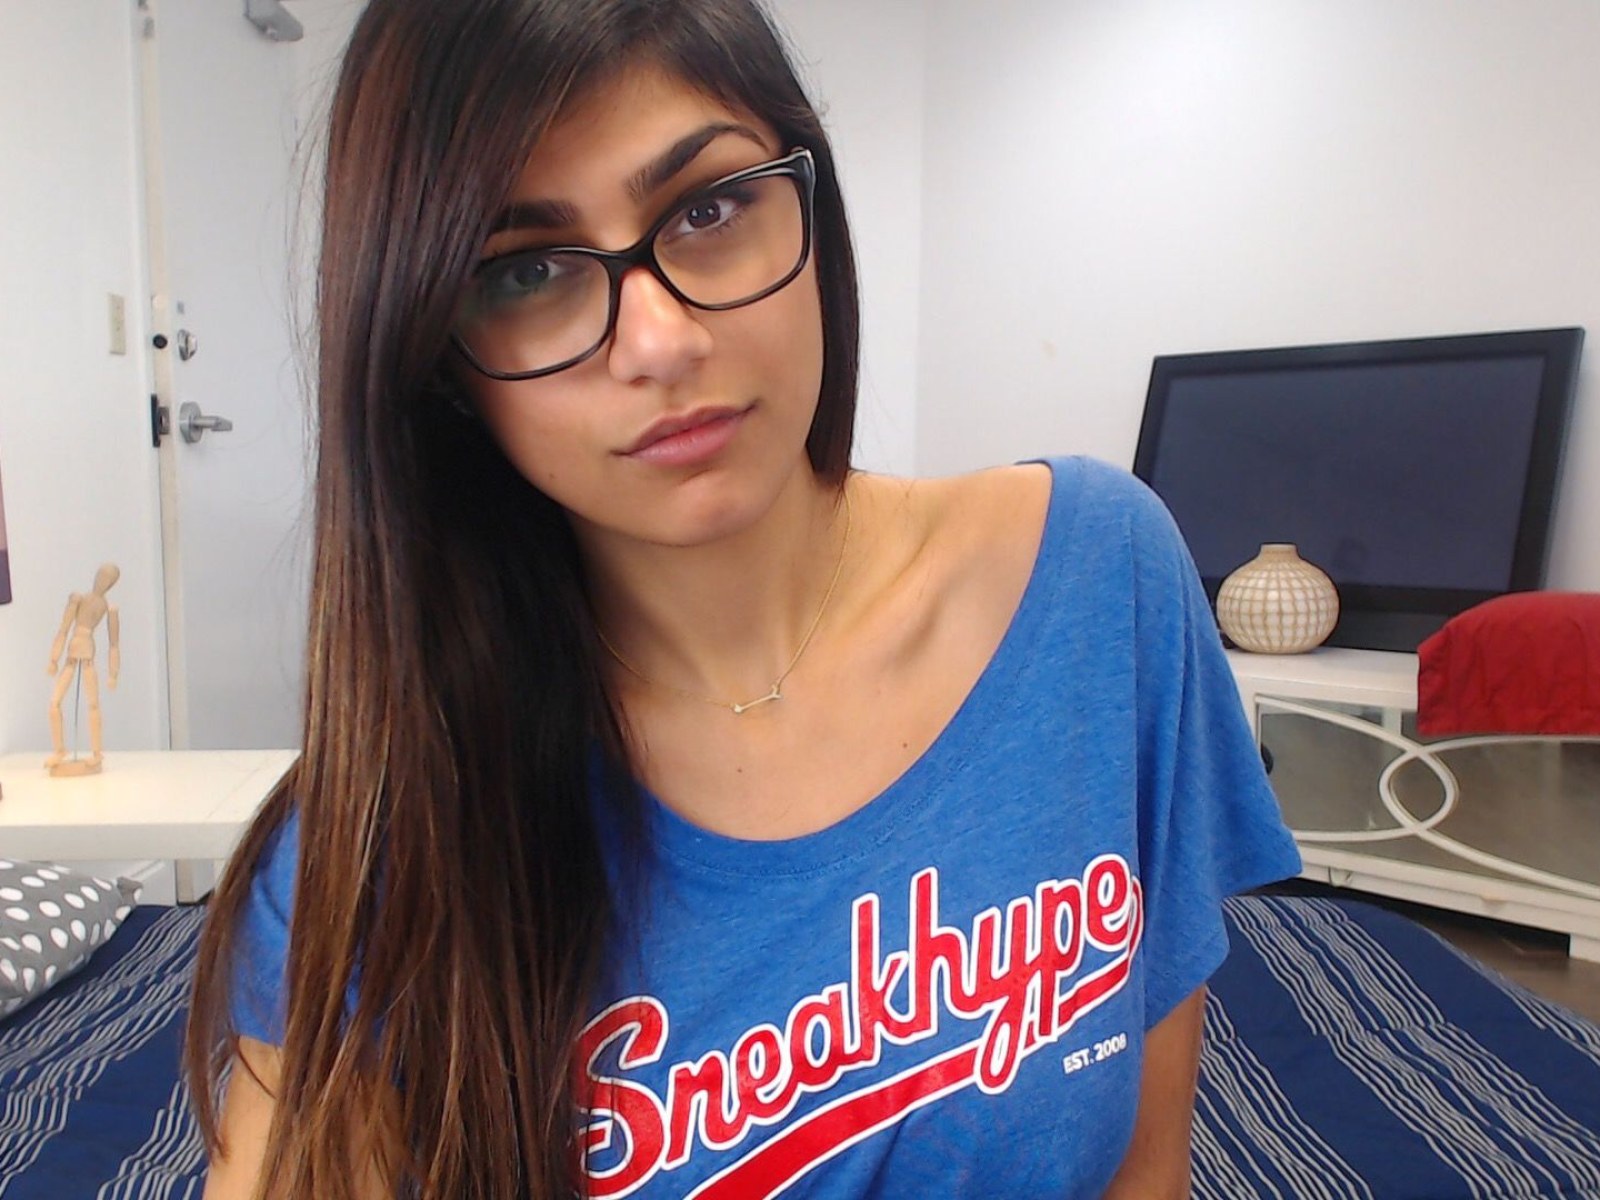 1600px x 1200px - Meet Mia Khalifa, the Lebanese Porn Star Who Sparked a National Controversy